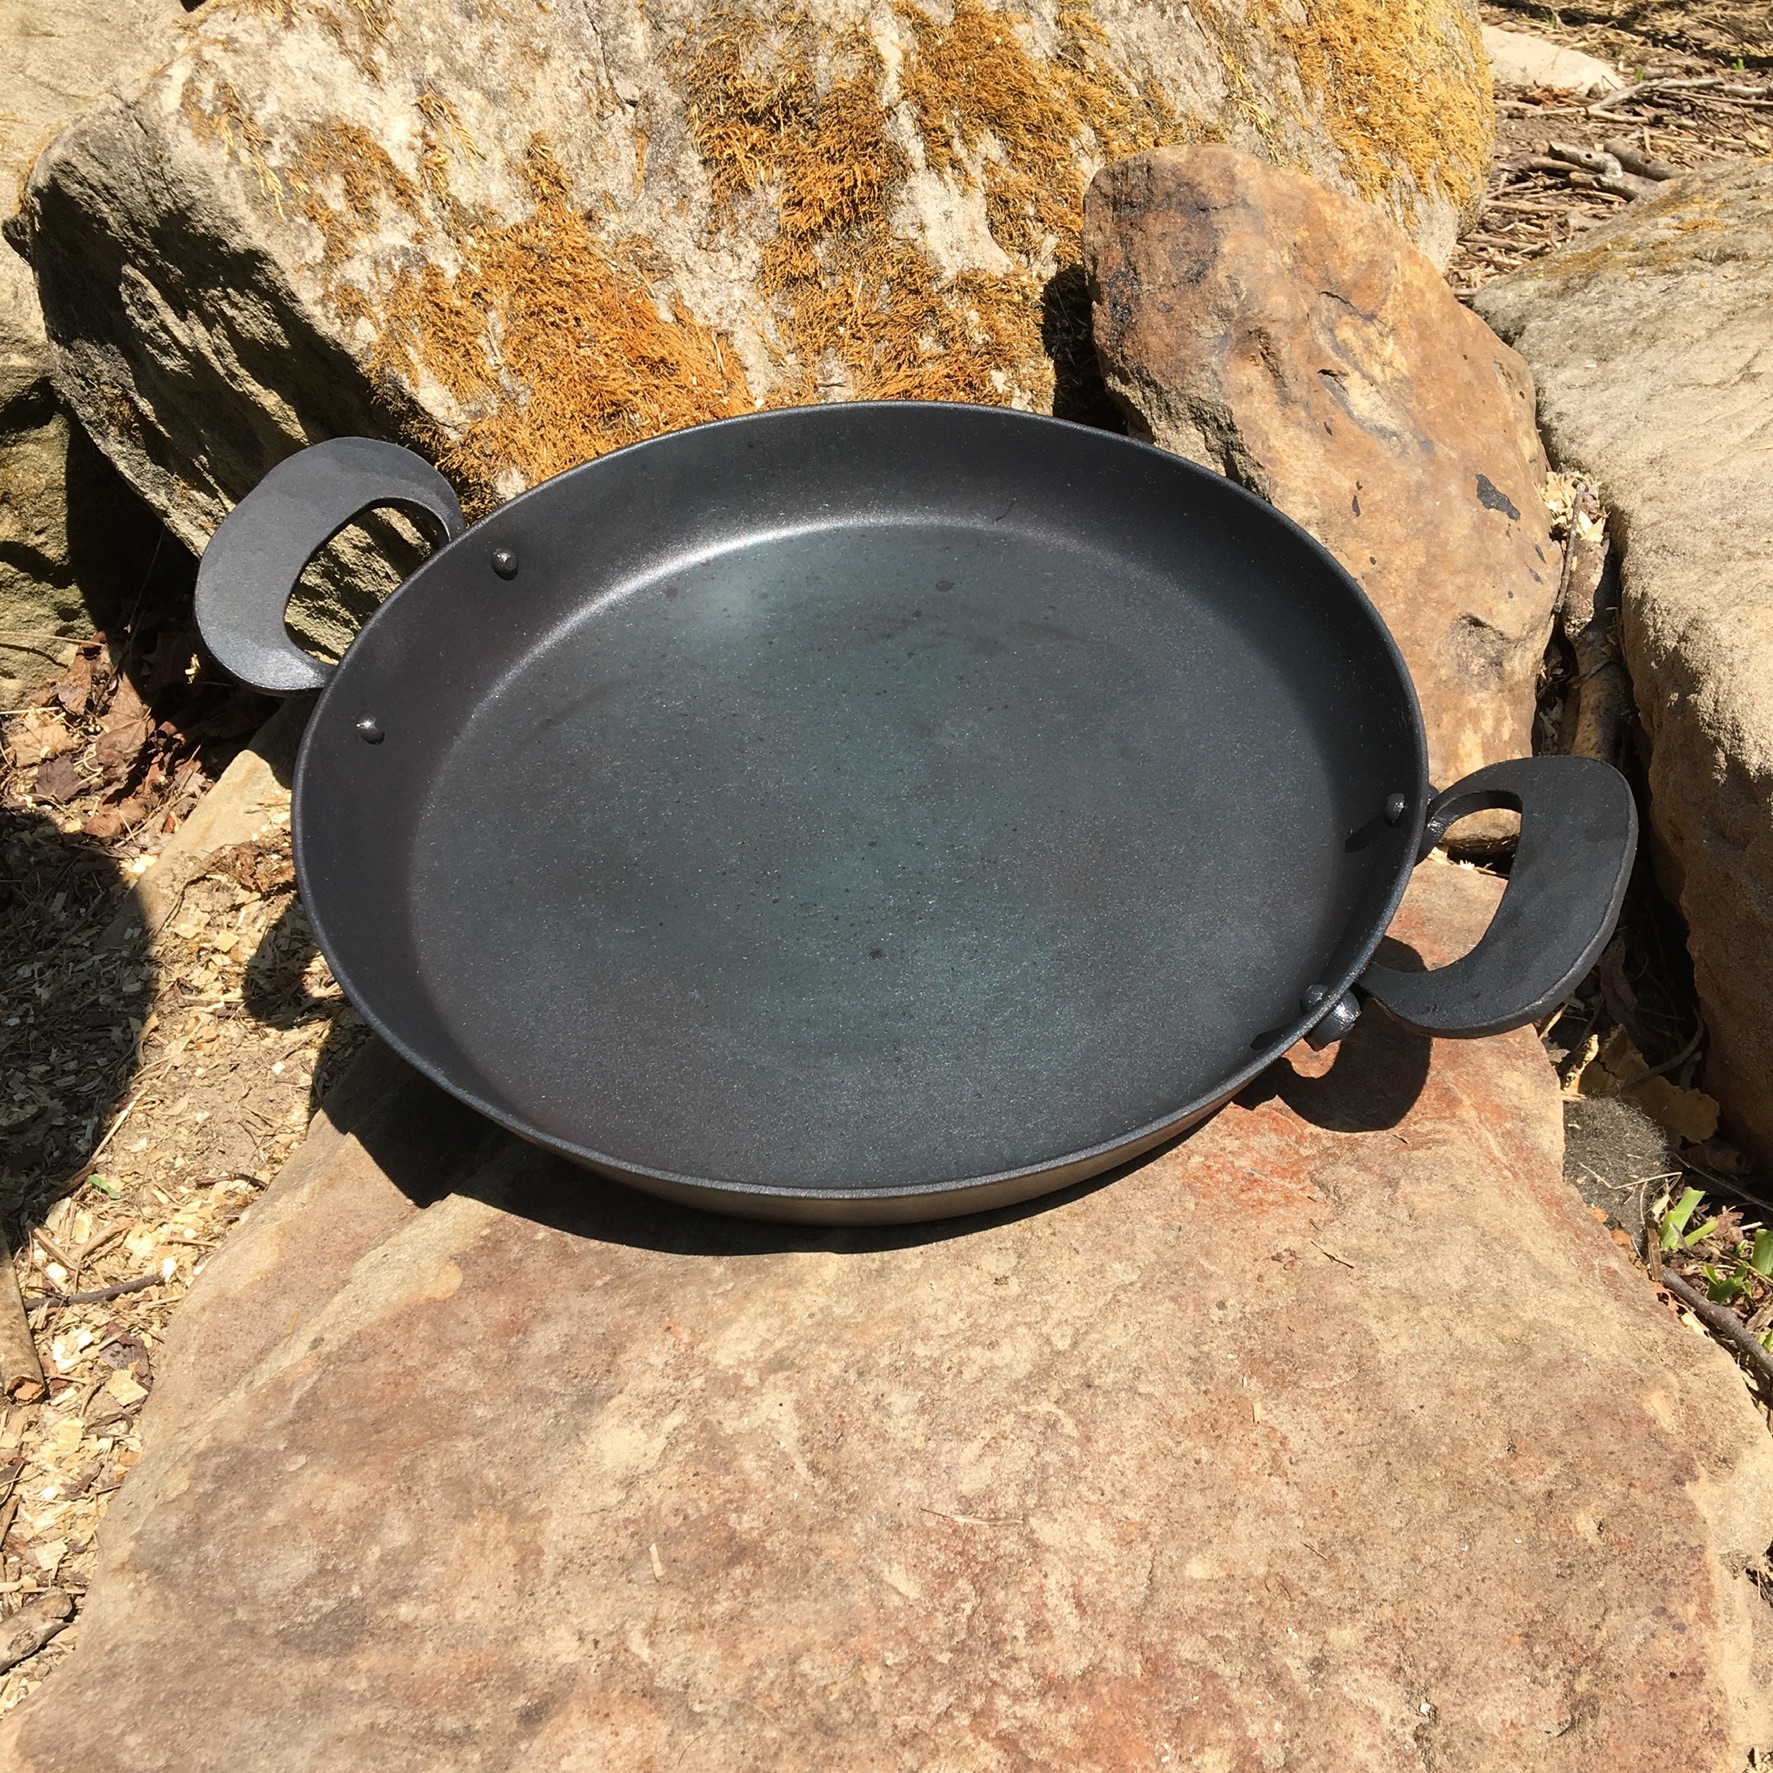 Hand Forged Lids for the 11 inch skillet